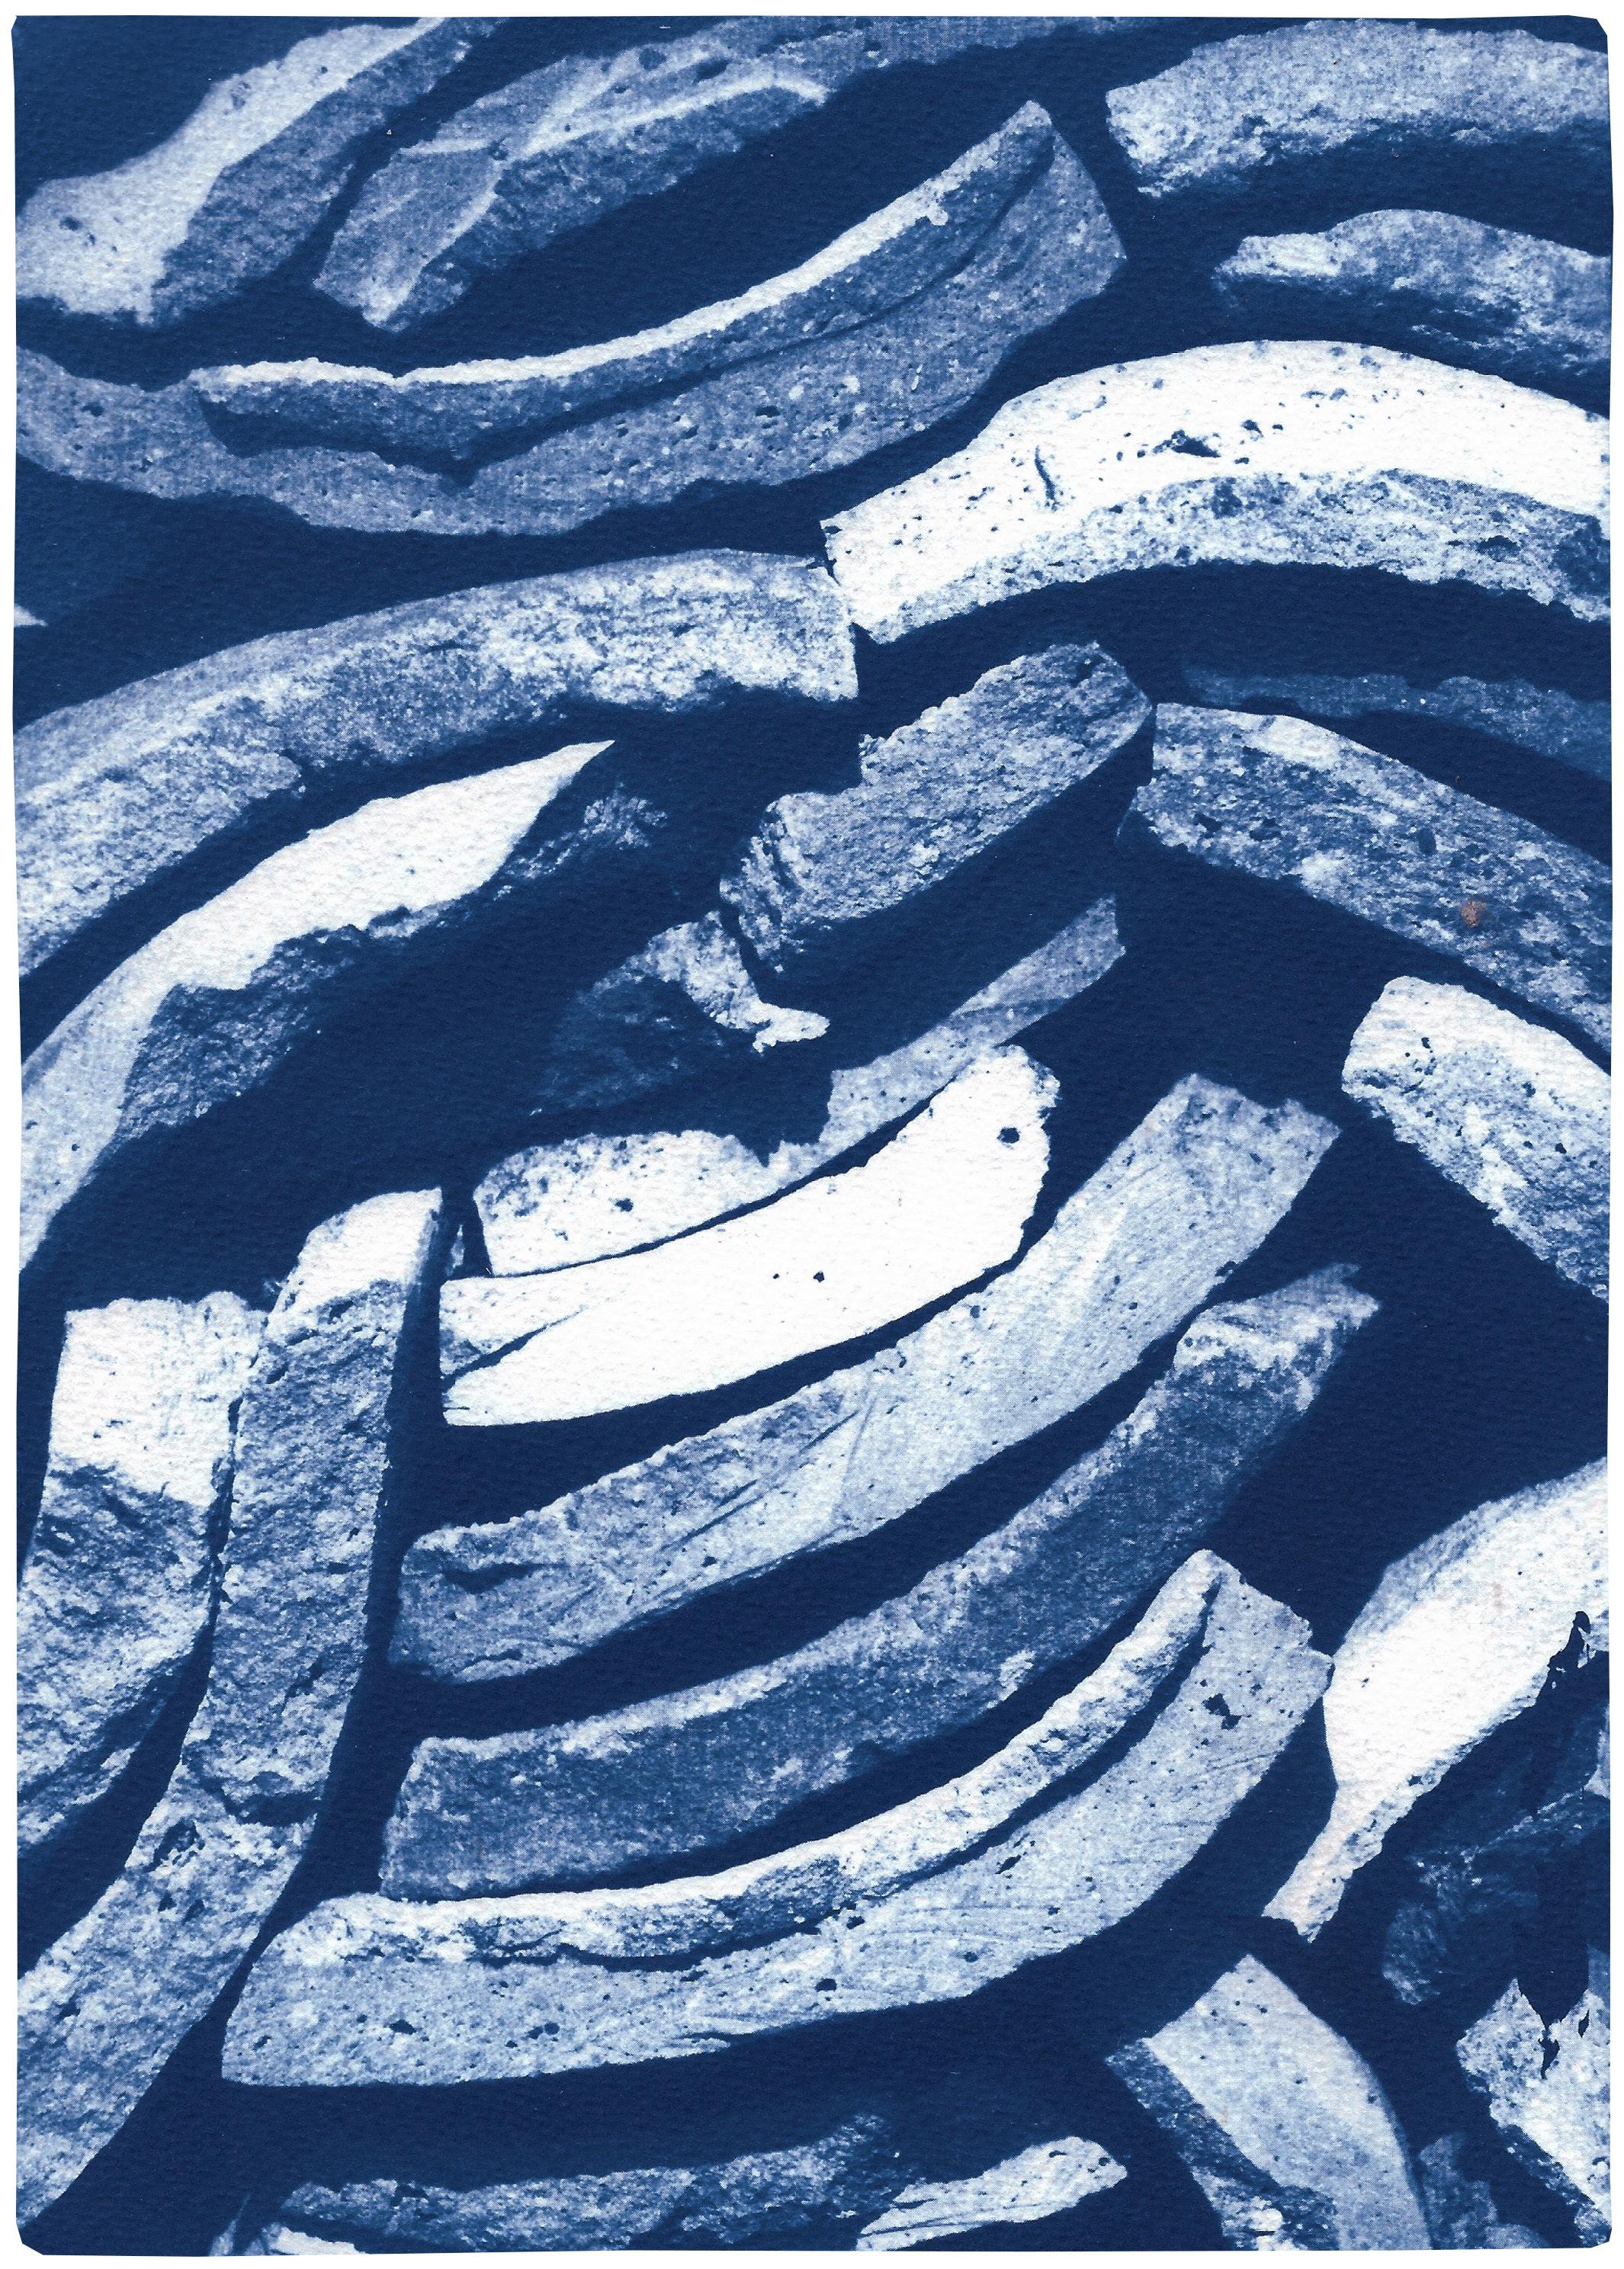 Country House Art of Stacked Curves Tiles in Blue Tones, Large Cyanotype Print